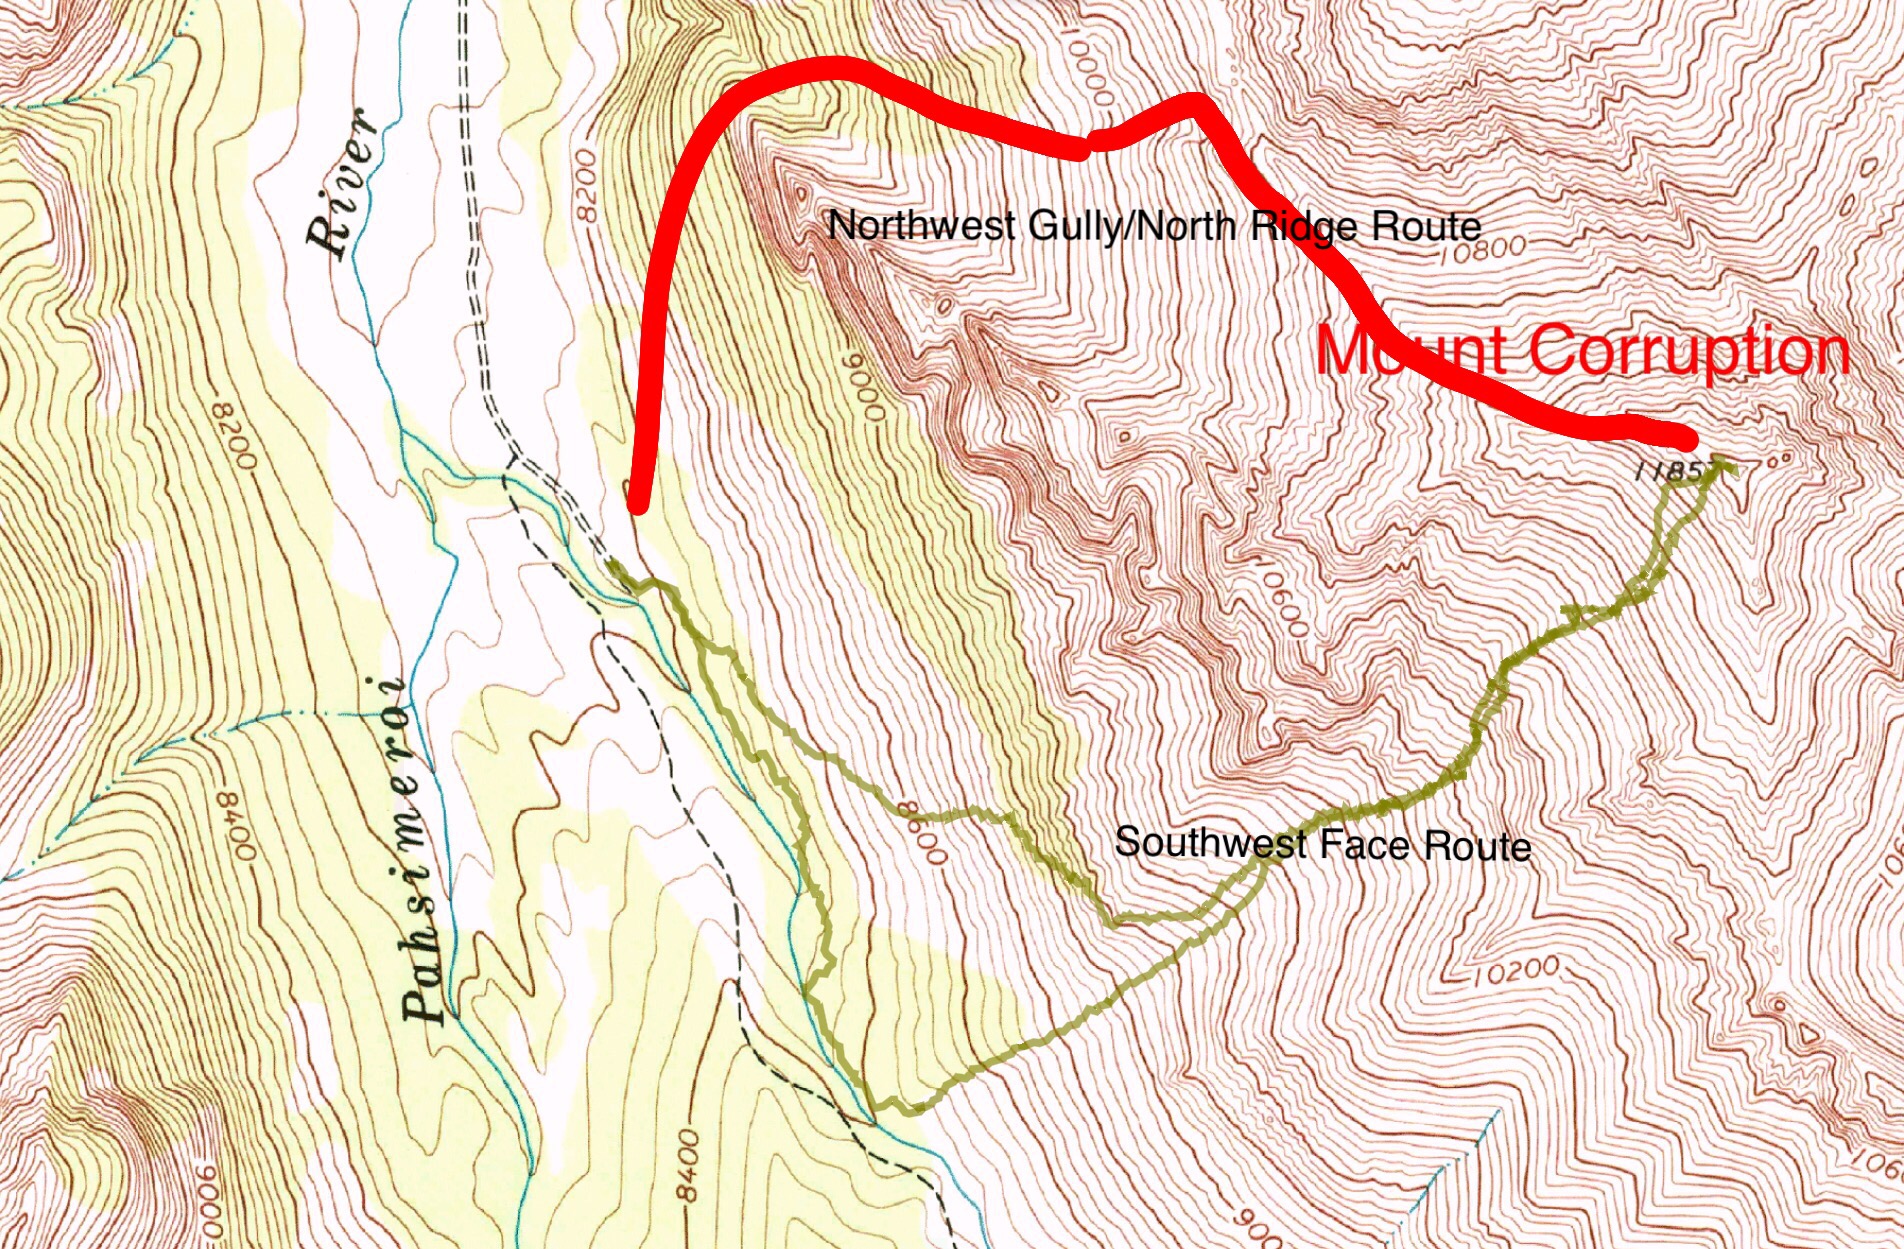 The green line is Brett Sergenian’s GPS track for the Southwest Face Route. The redline is the approximate line of Northwest Gully/North Ridge route.